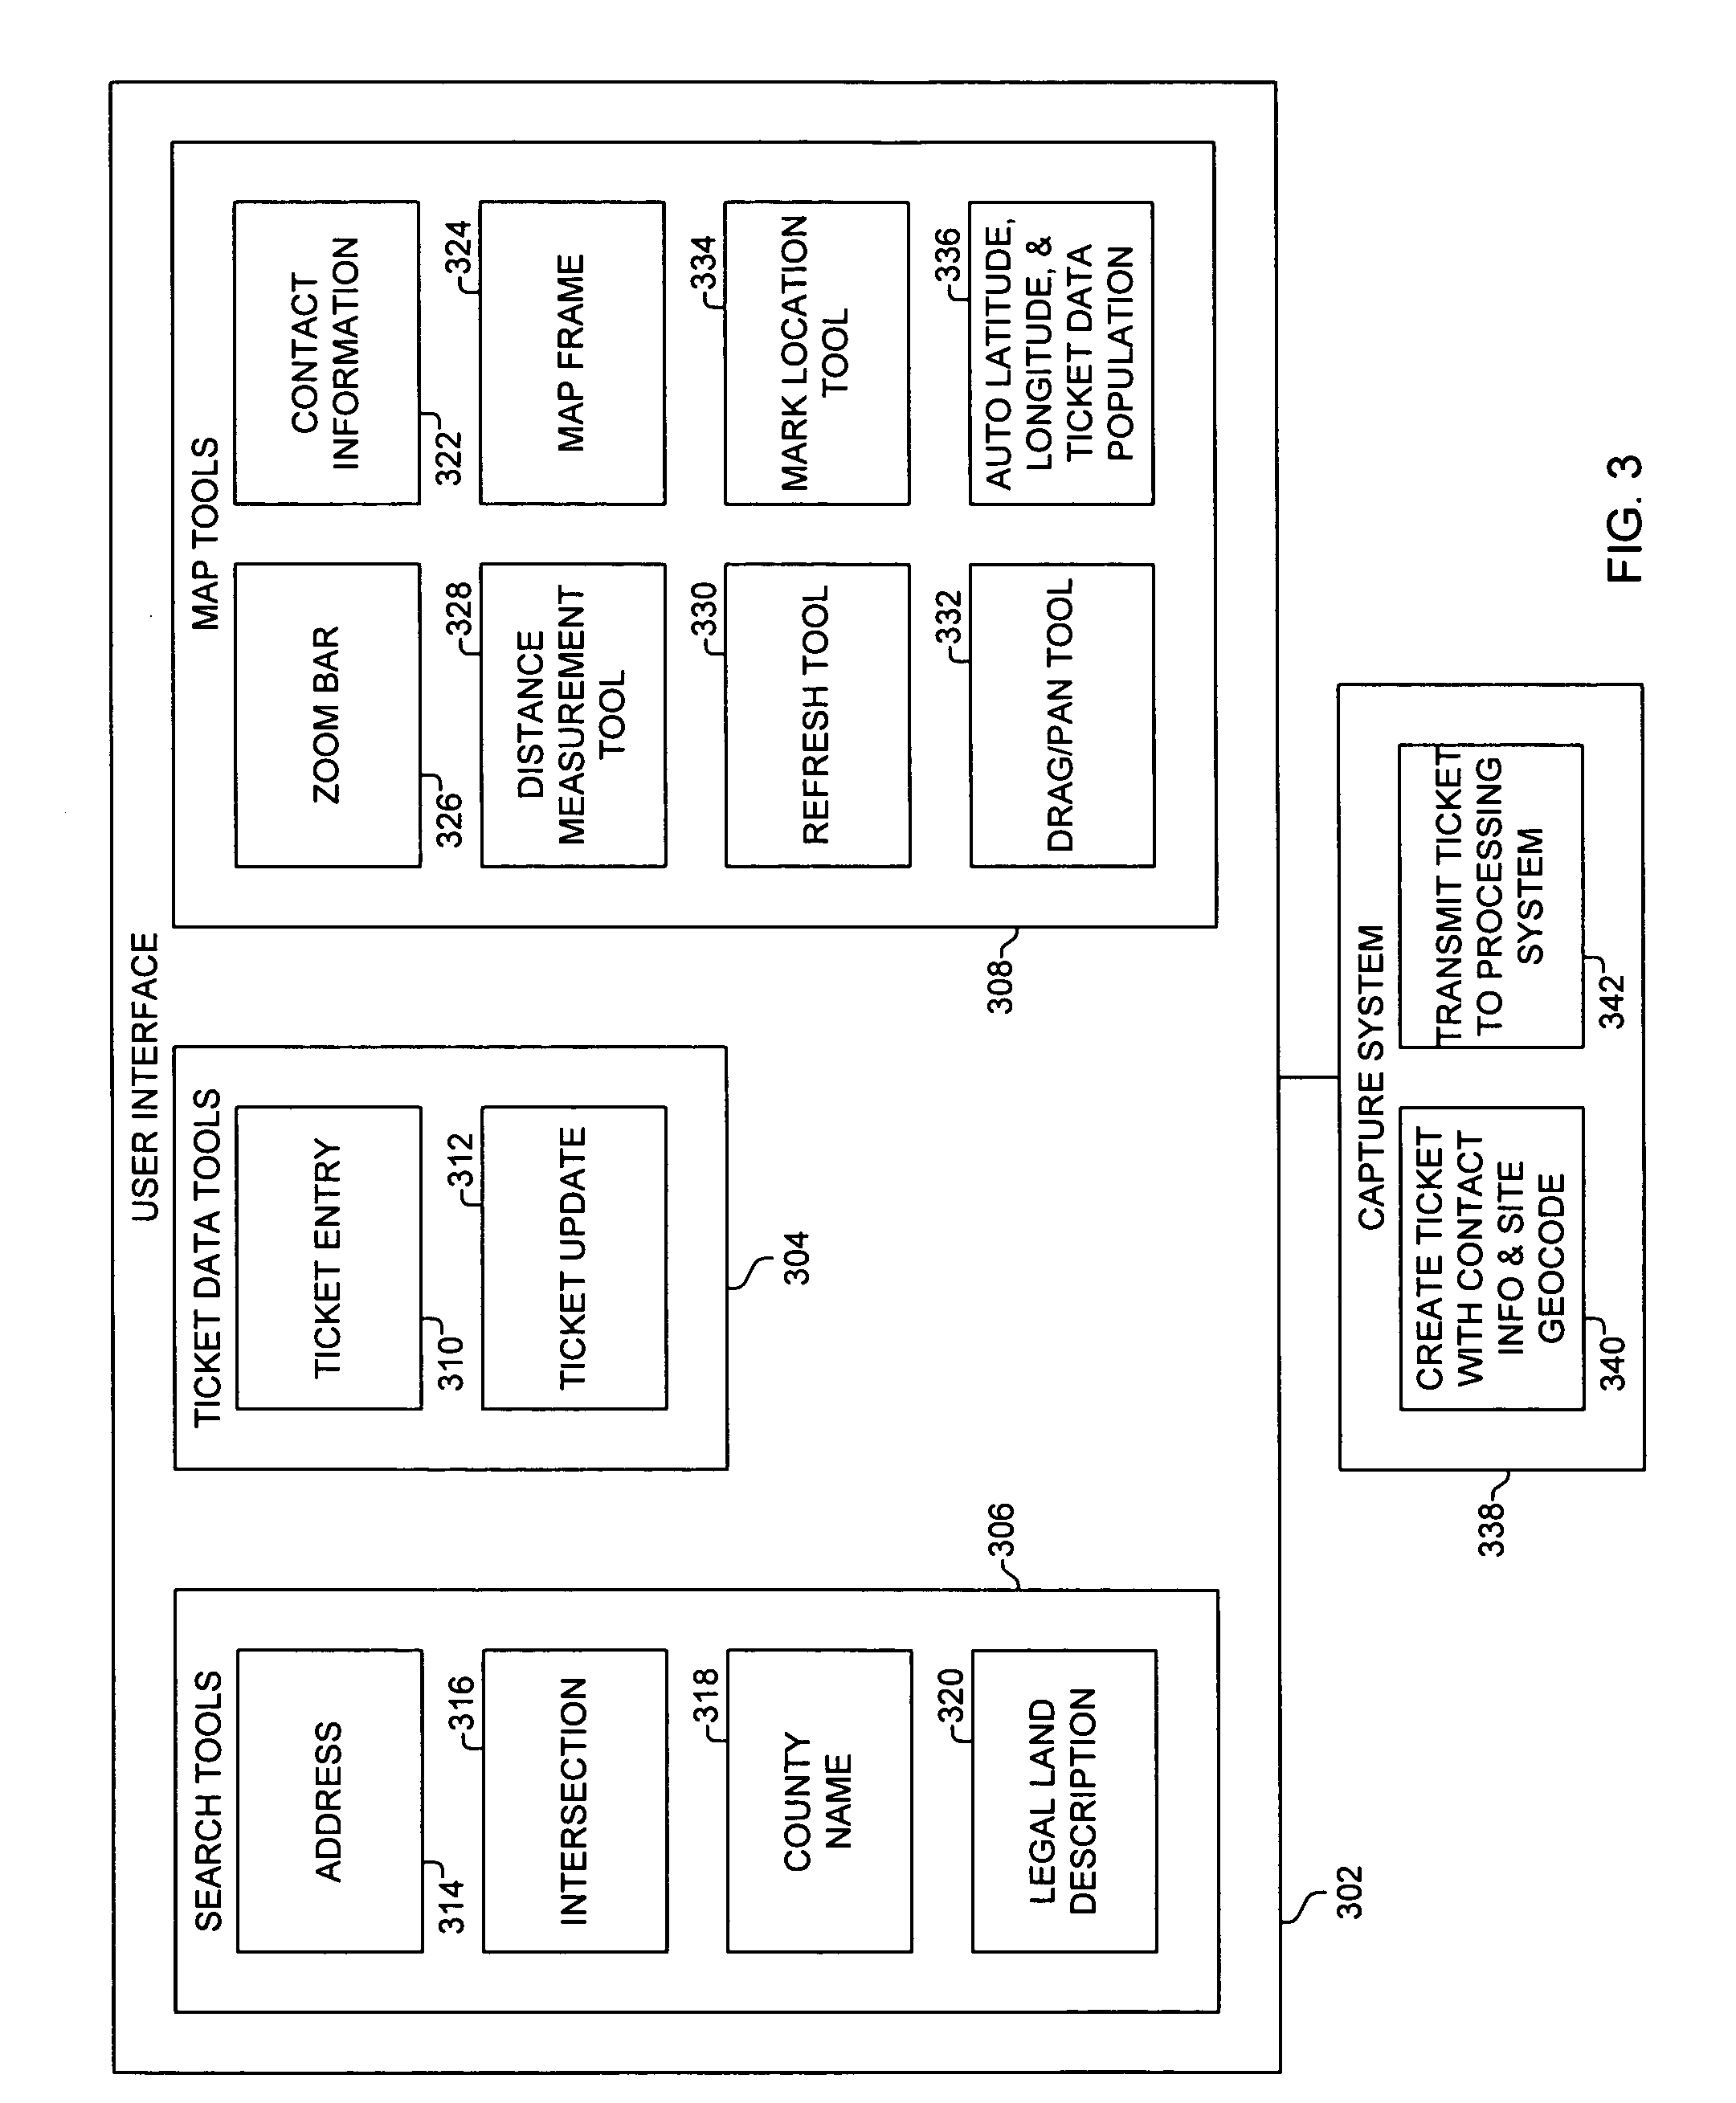 Ticket entry systems and methods